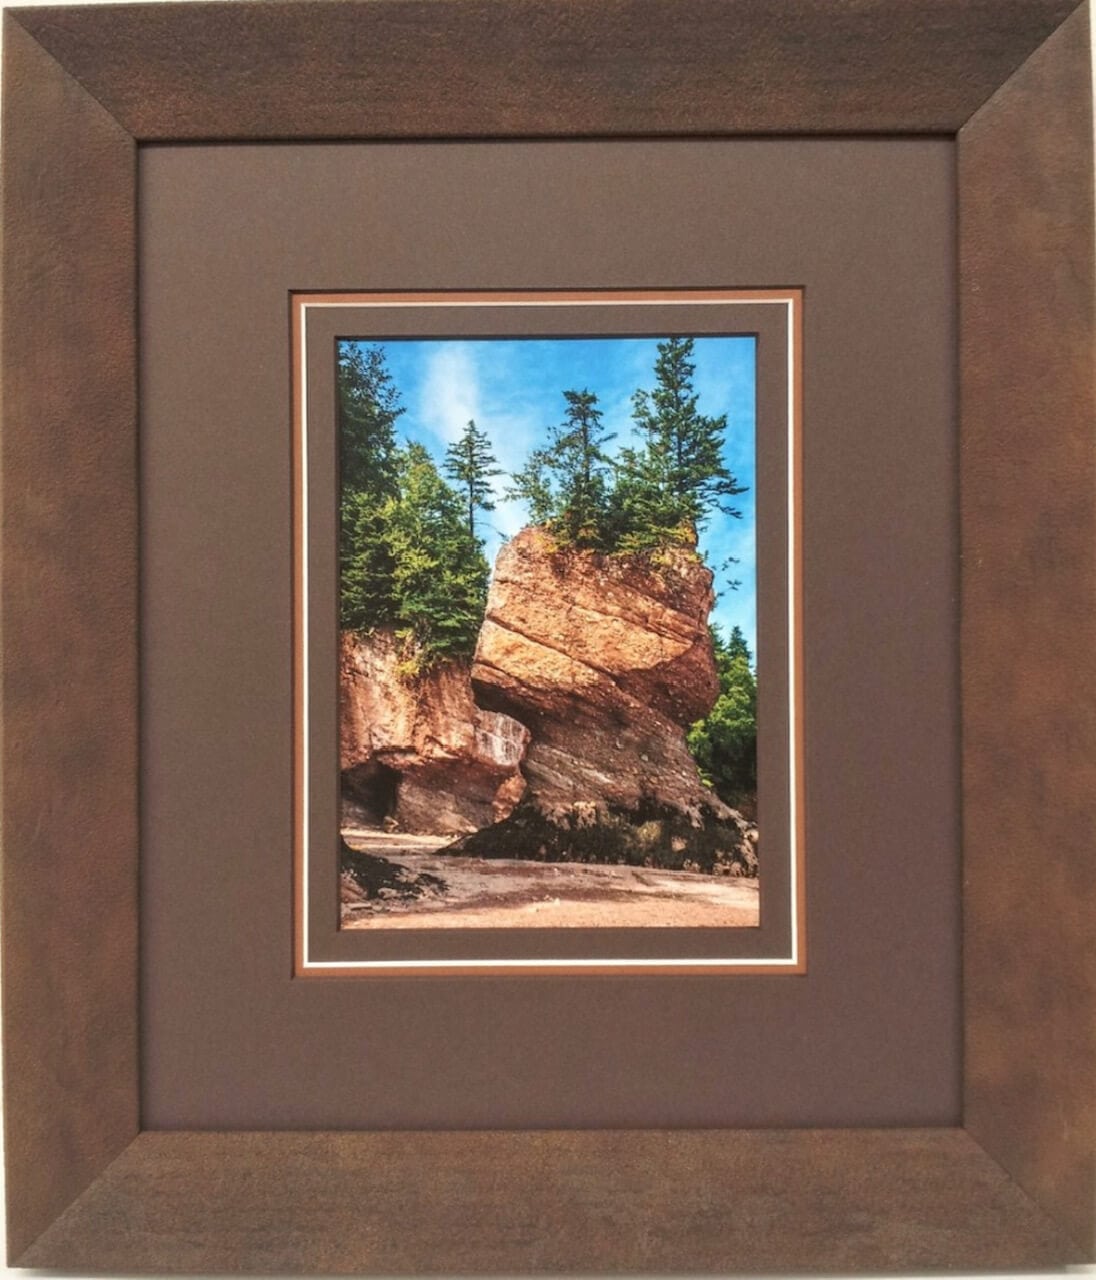 A photo of a rock formation framed in a brown frame.